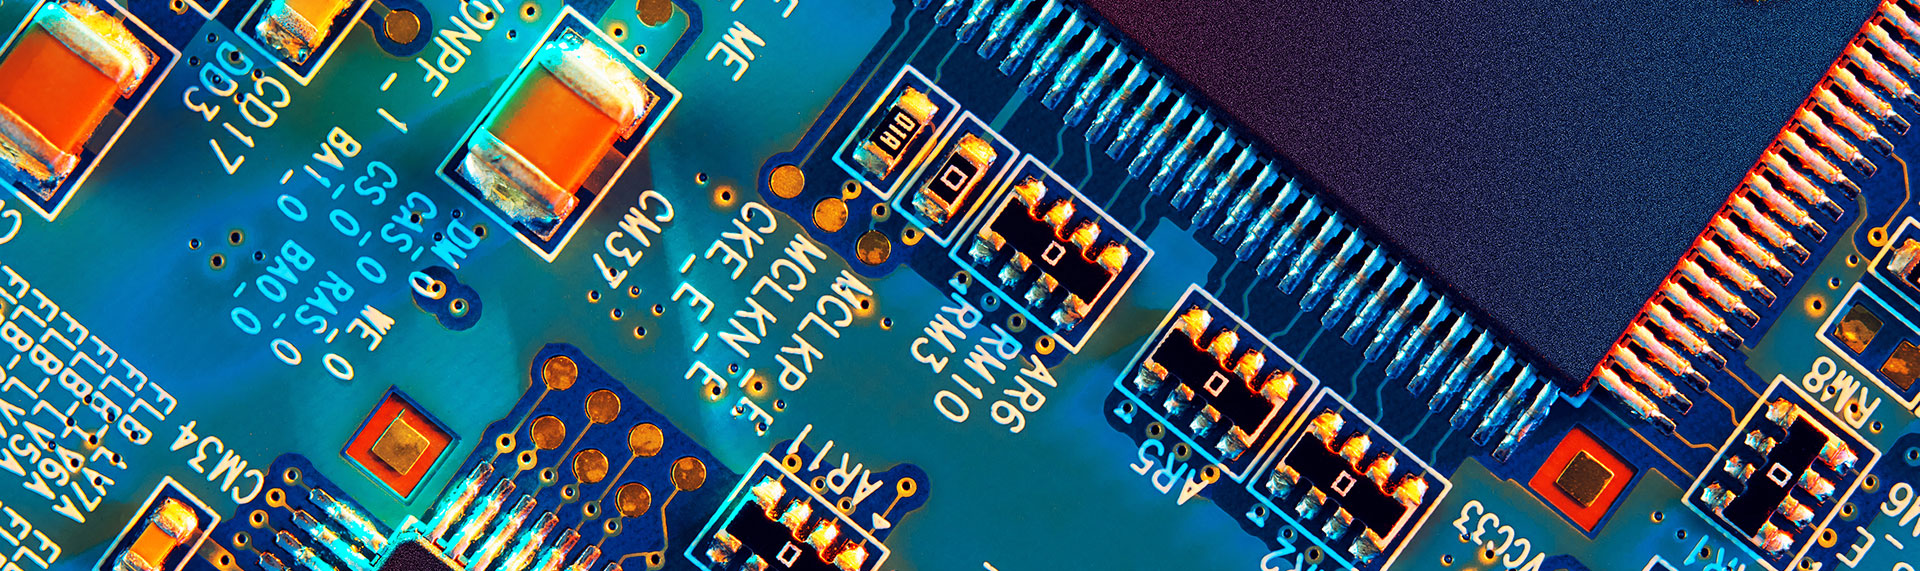 Semiconductors and Board Level Electronic Components